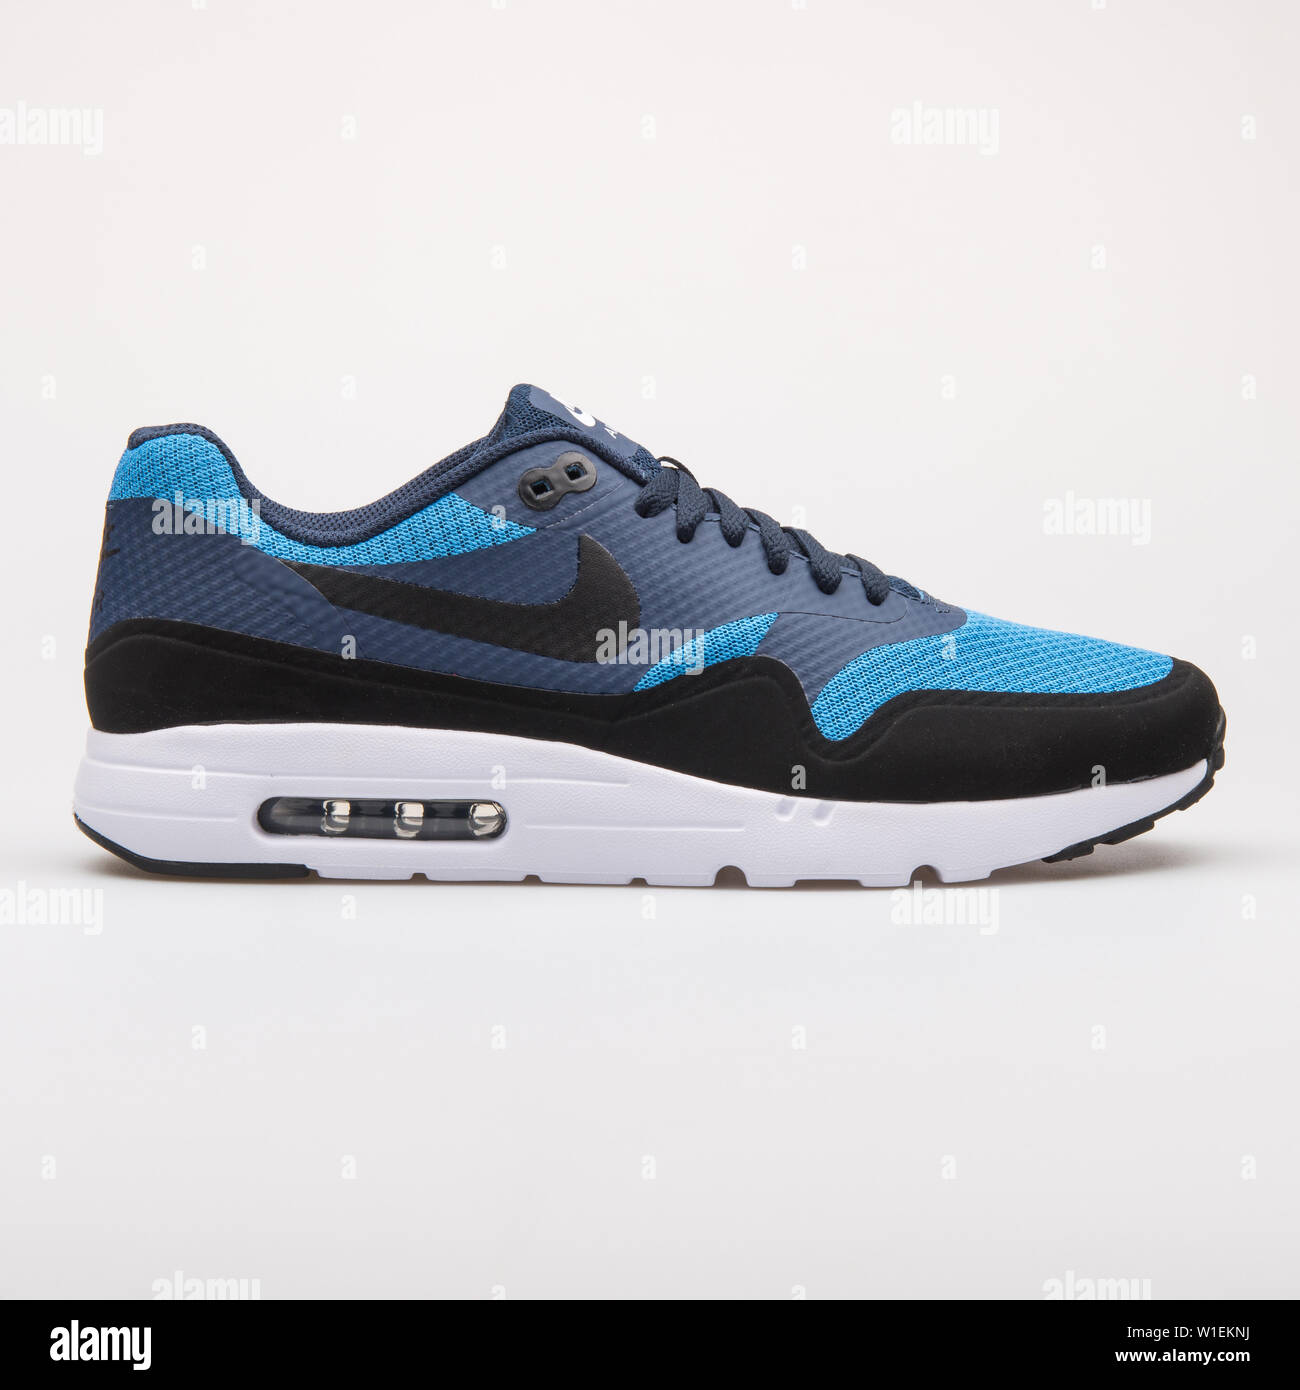 VIENNA, AUSTRIA - AUGUST 28, 2017: Nike Air Max 1 Ultra Essential black,  blue and obsidian sneaker on white background Stock Photo - Alamy